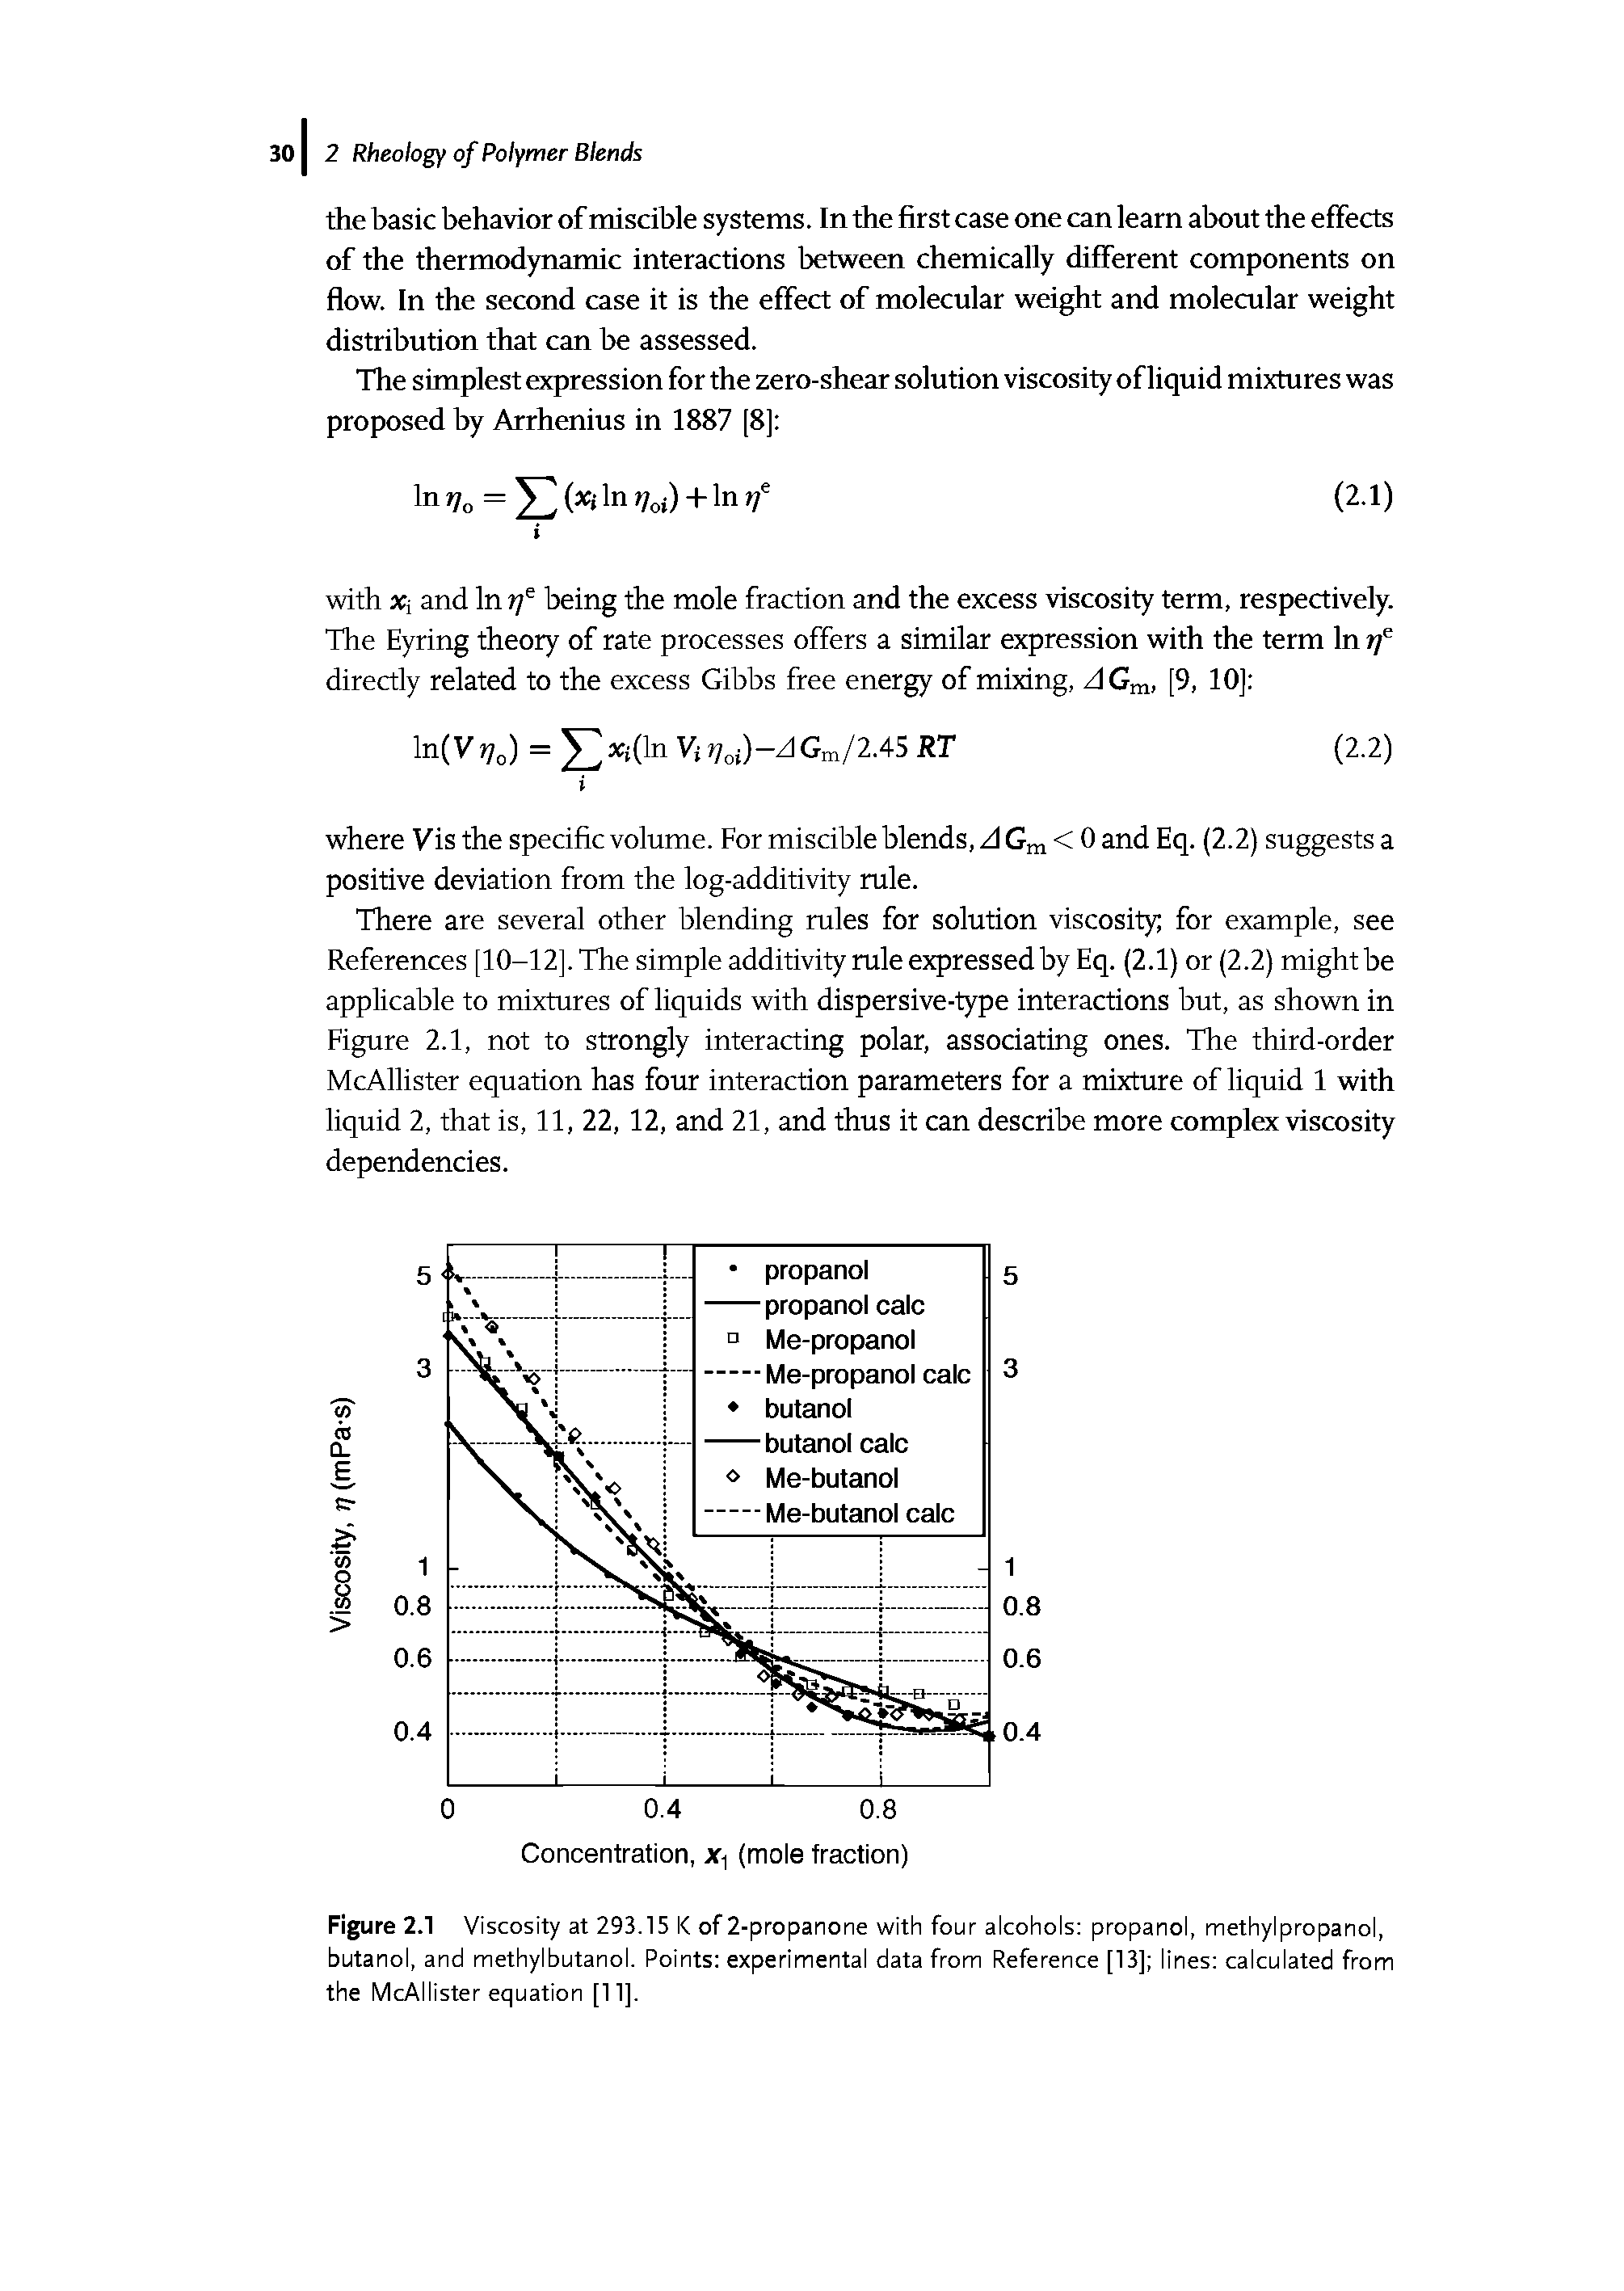 Figure 2.1 Viscosity at 293.15 K of 2-propanone with four alcohols propanol, methylpropanol, butanol, and methylbutanol. Points experimental data from Reference [13] lines calculated from the McAllister equation [11],...